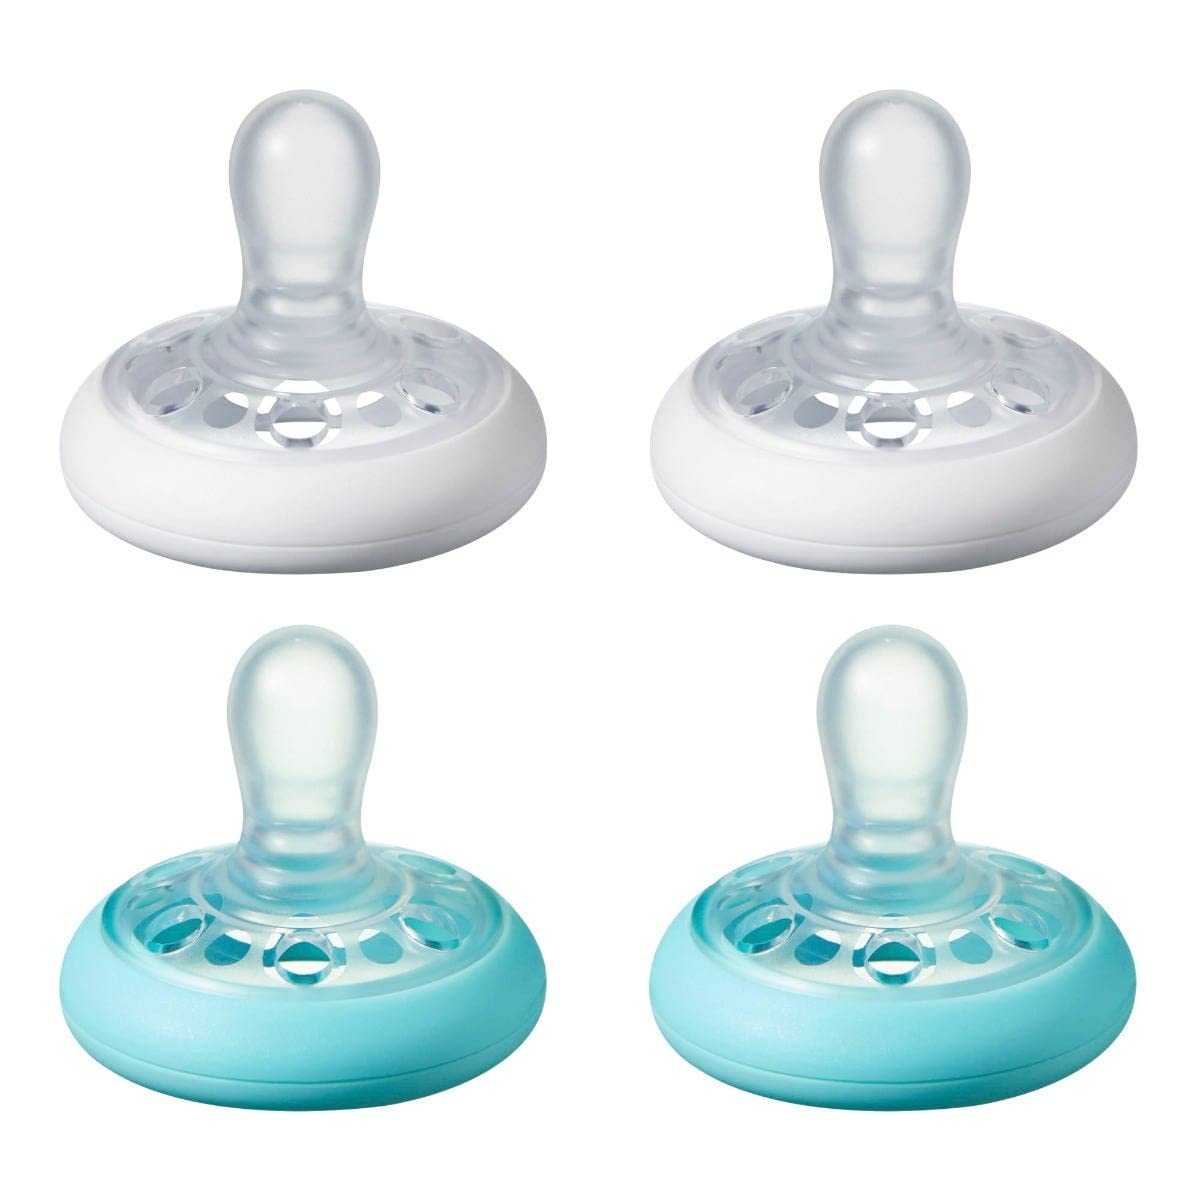 Tommee Tippee Breast-like Soother, 0-6m, Blue & White - Pack of 4